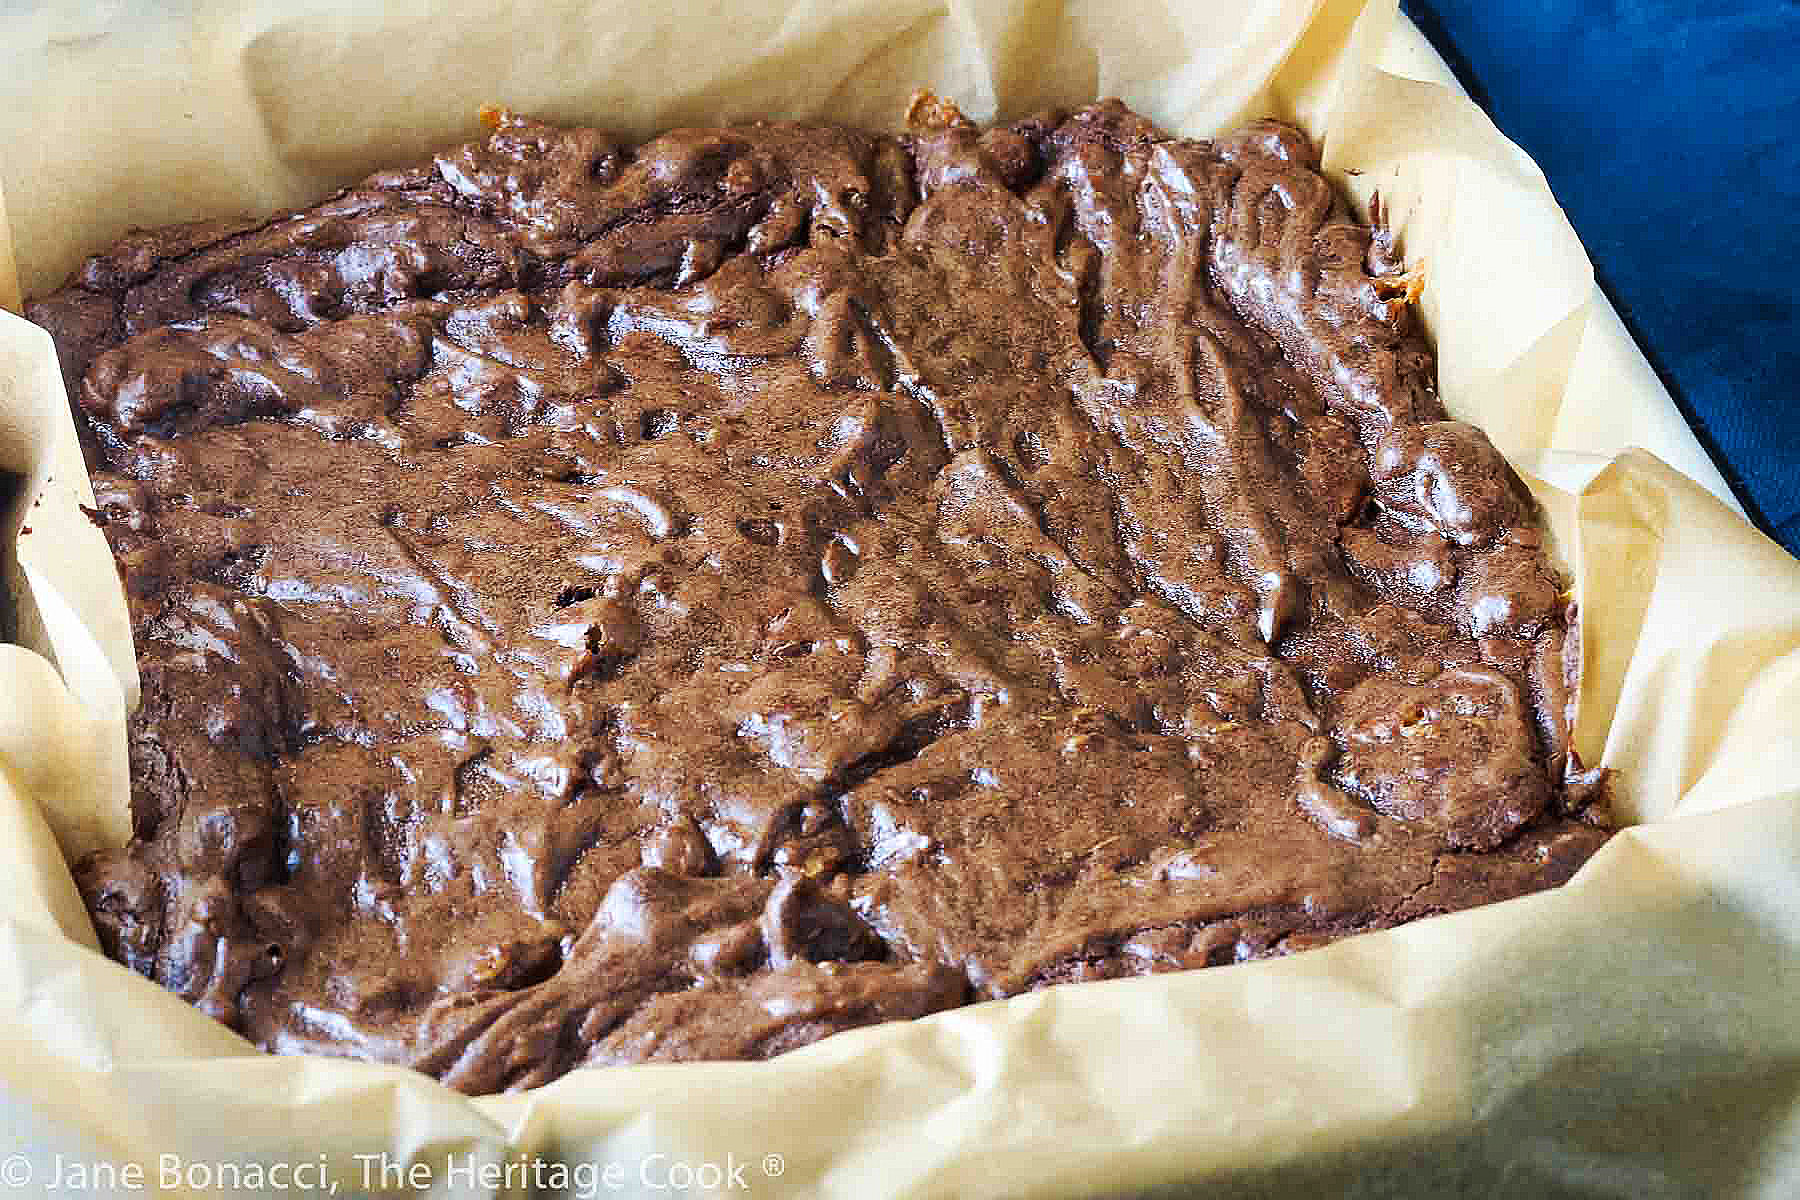 Whole block of brownies fresh from the oven.